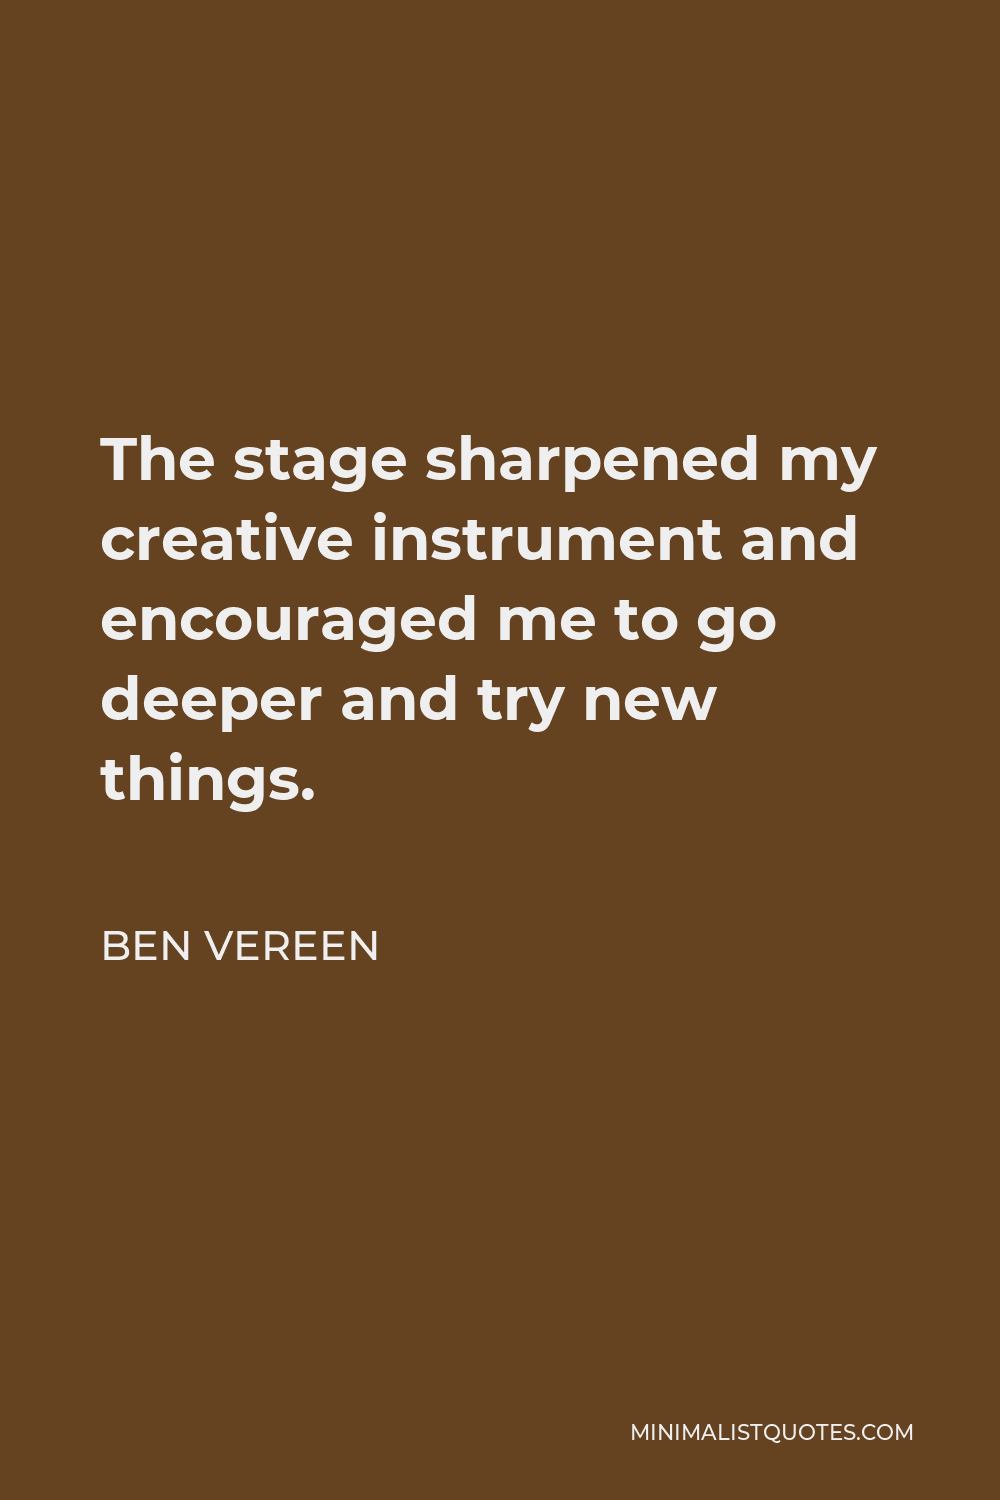 Ben Vereen Quote - The stage sharpened my creative instrument and encouraged me to go deeper and try new things.